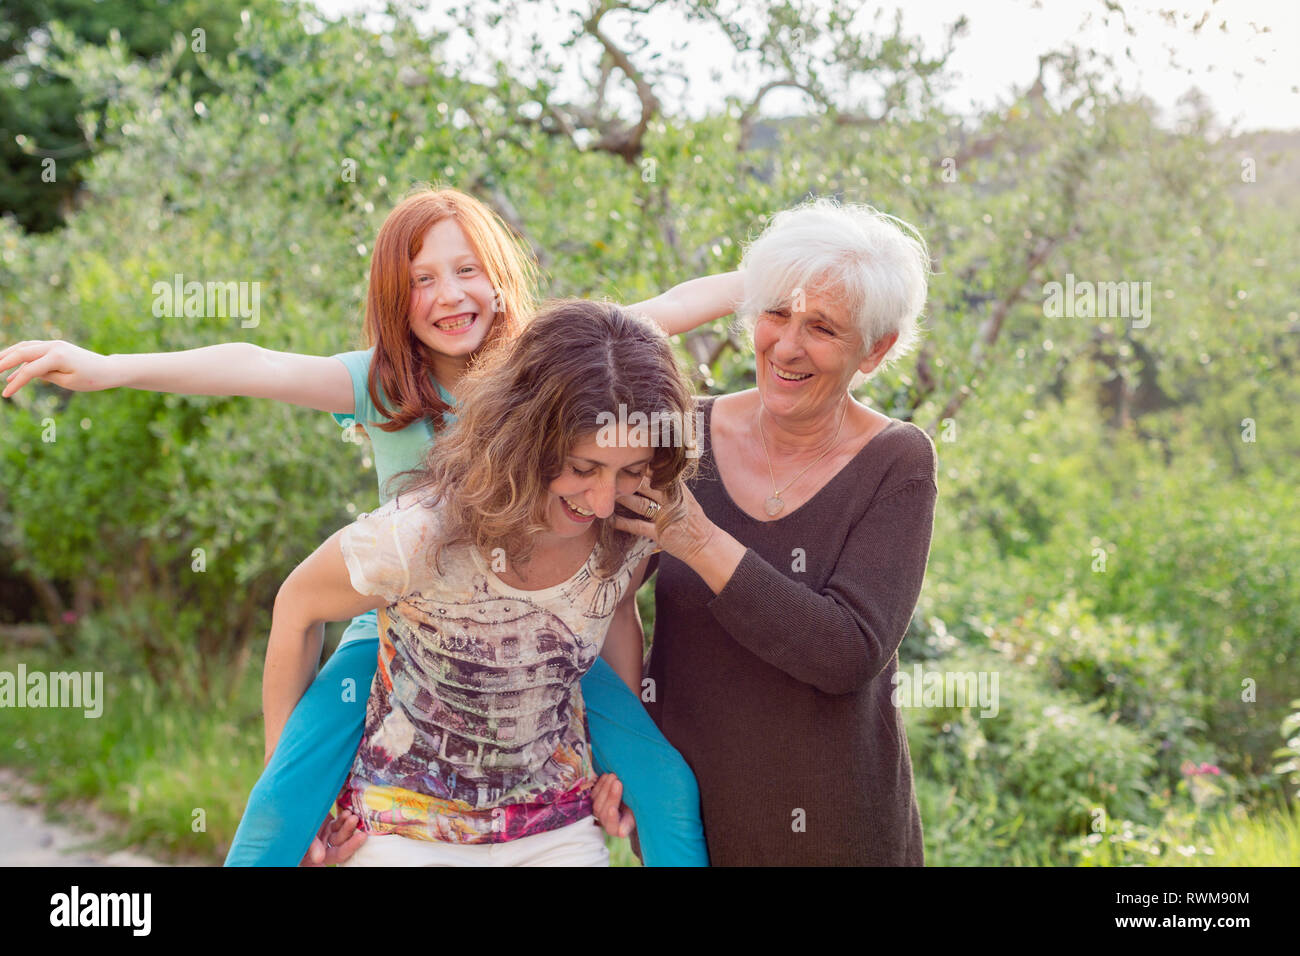 Girl getting piggyback with mother and grandmother in garden Stock Photo